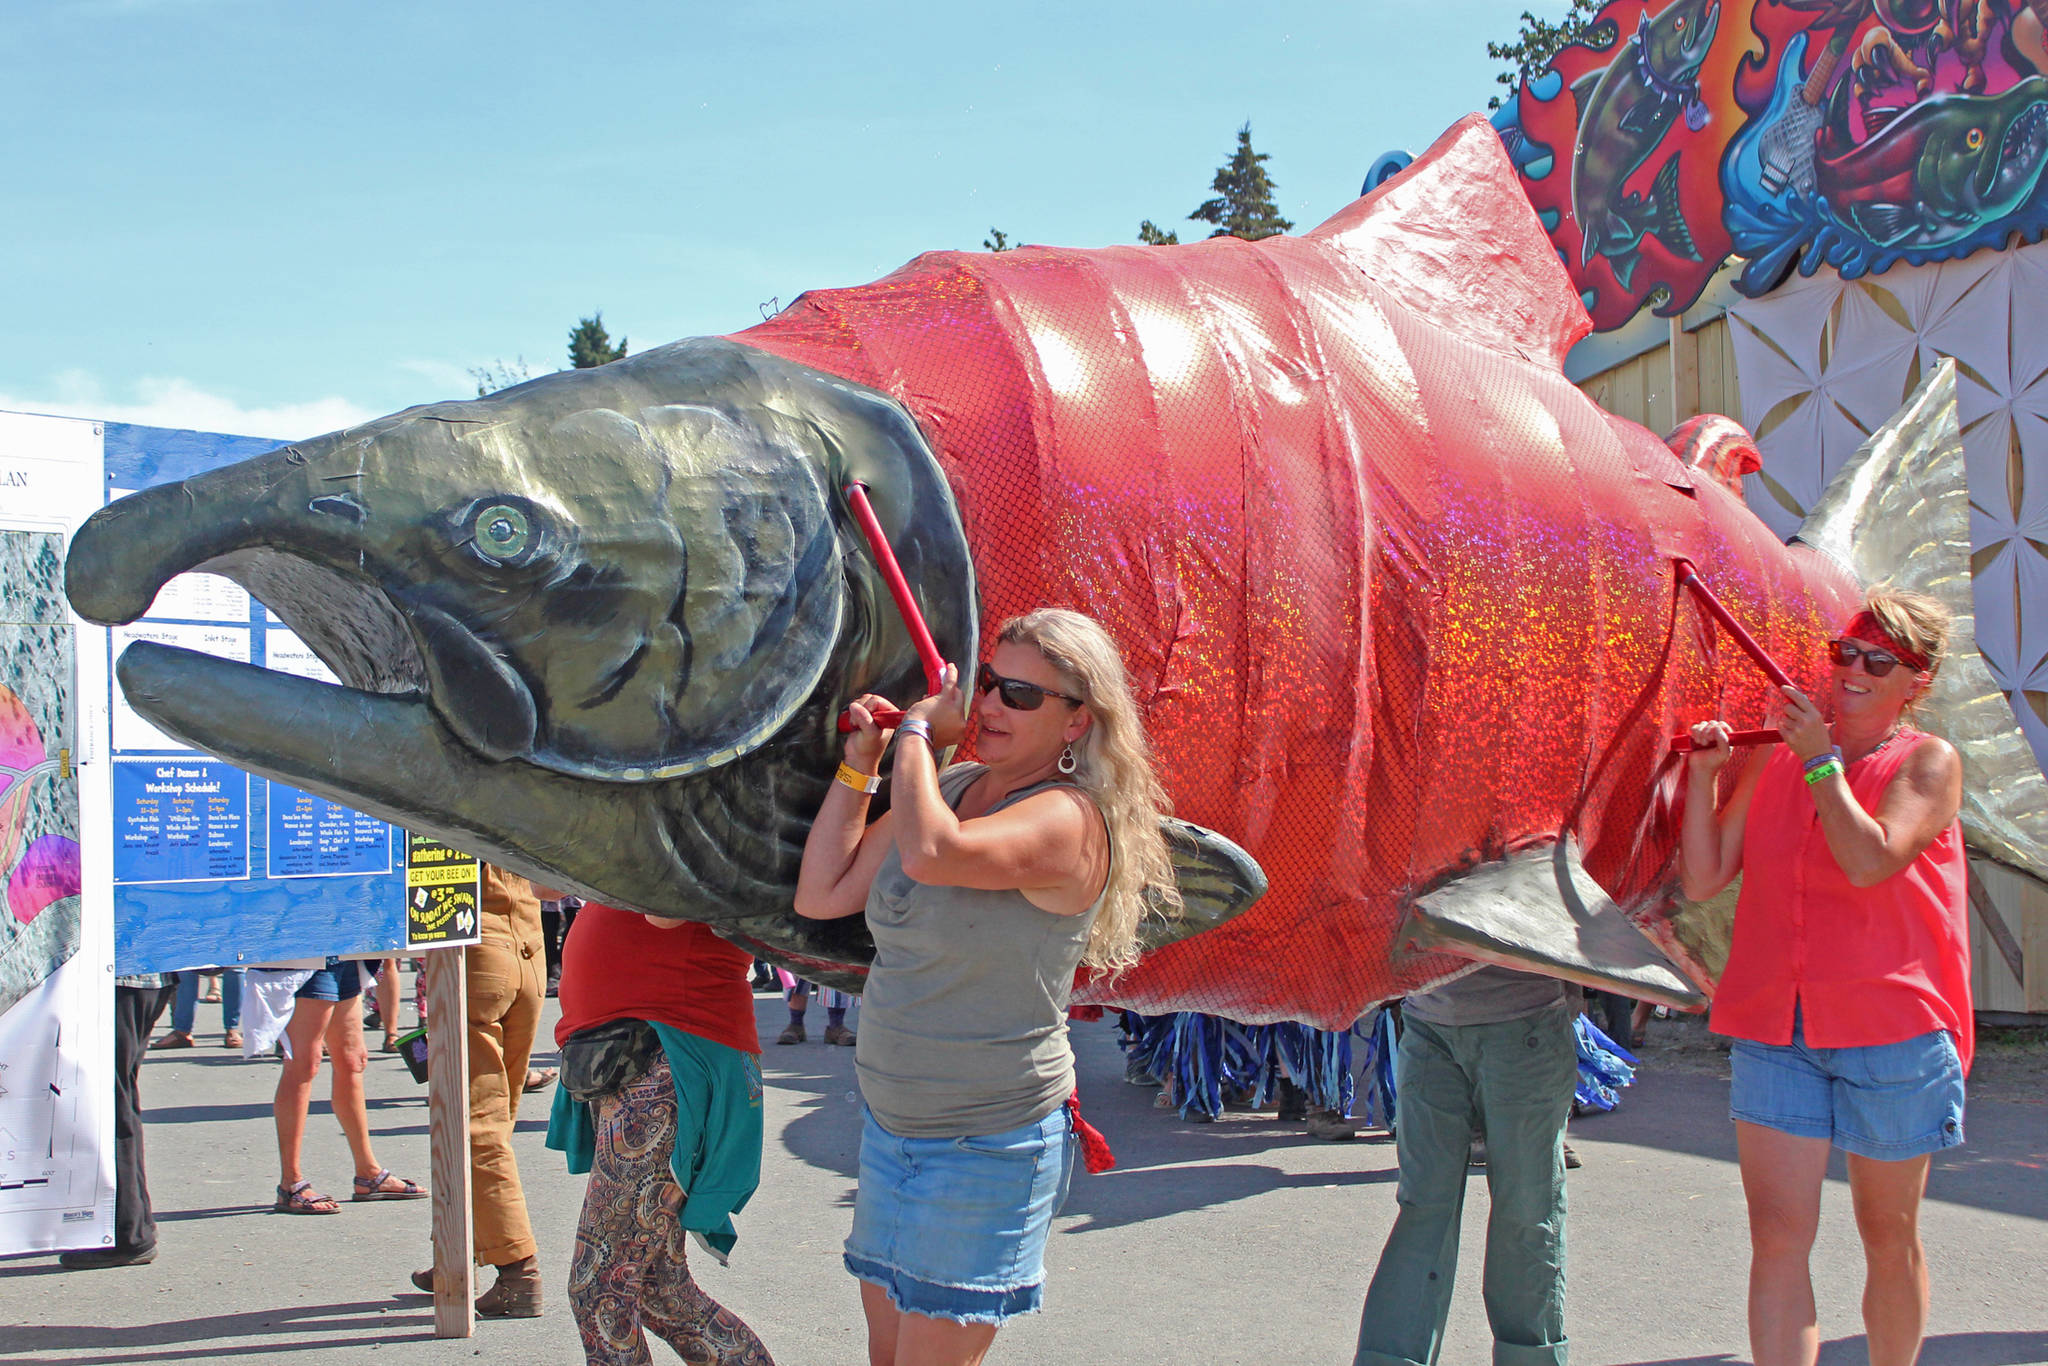 Volunteers carry a large salmon through the Ninilchik Fairgrounds during Salmonfest on Saturday, Aug. 3, 2019 in Ninilchik, Alaska. (Photo by Megan Pacer/Homer News)